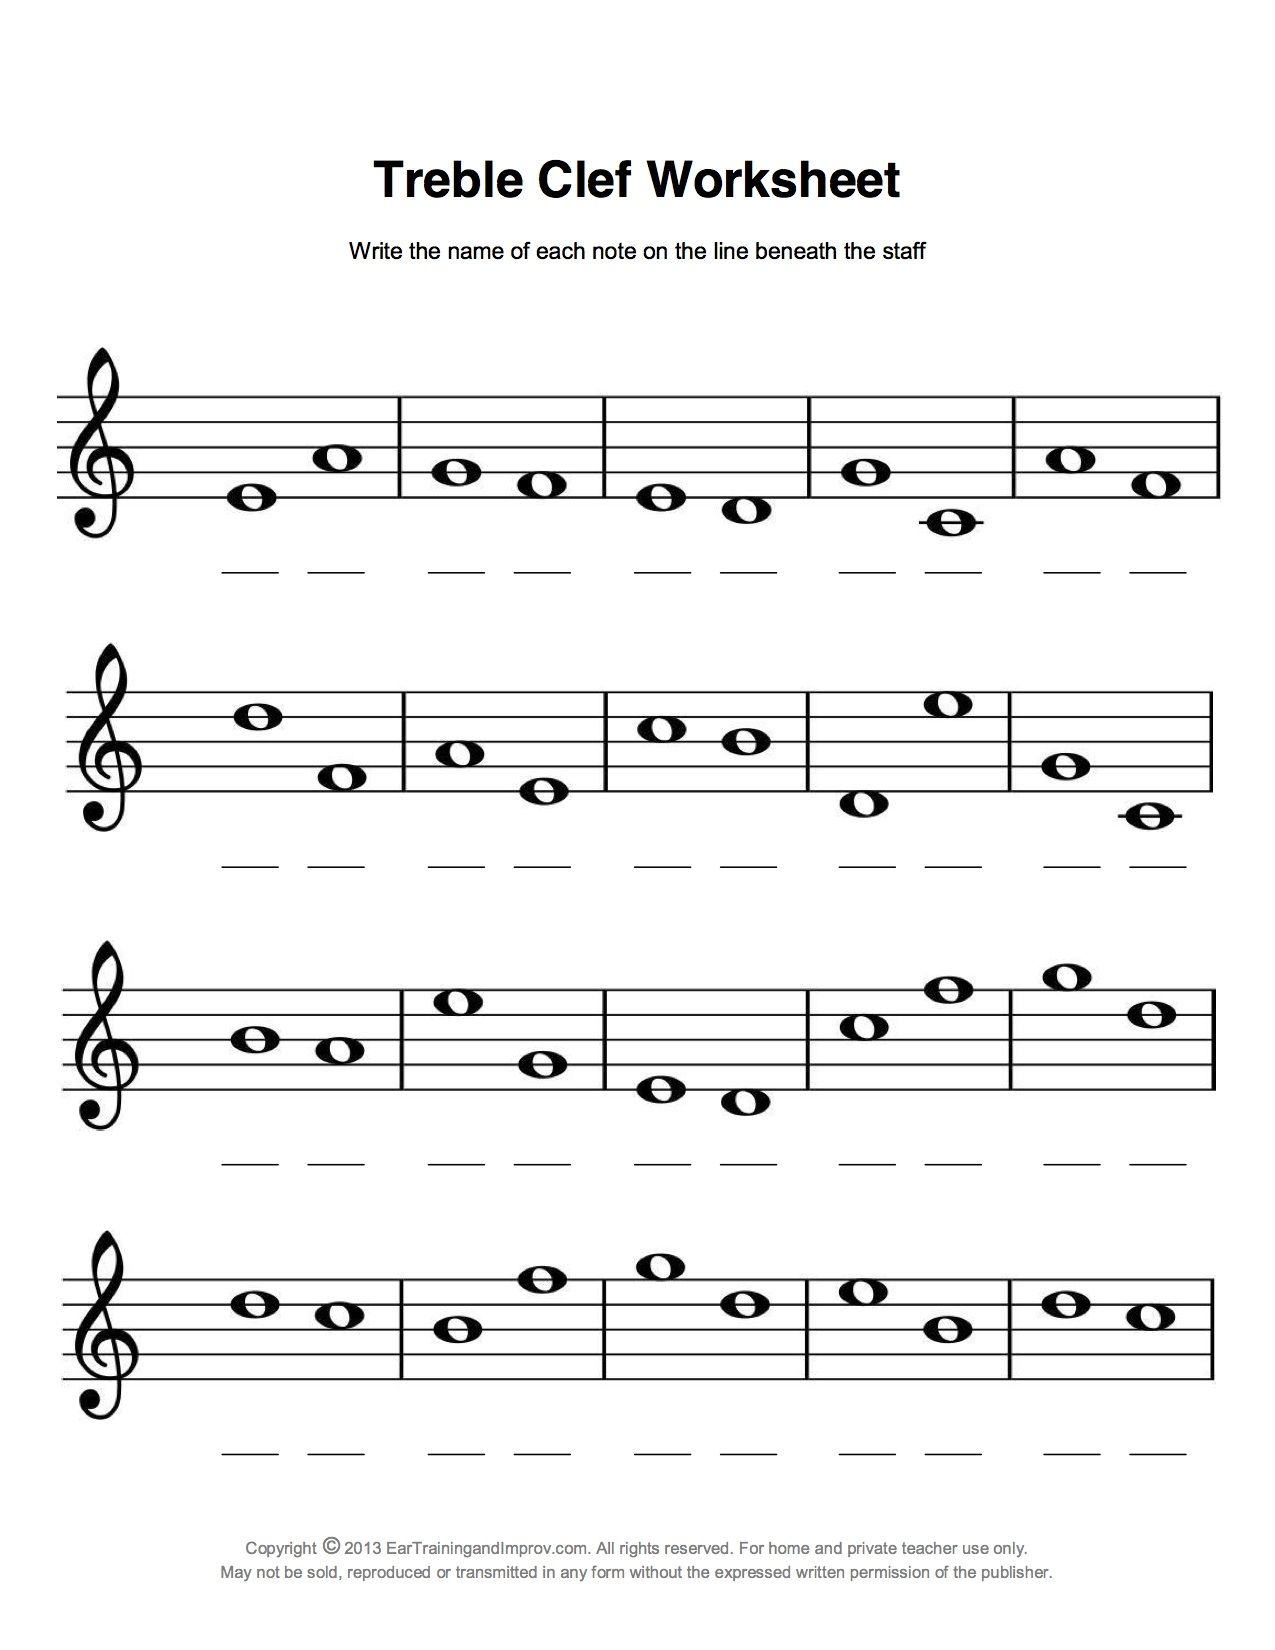 Easy Fun Music Theory | Music Theory | Music, Music Theory | Free Printable Music Theory Worksheets